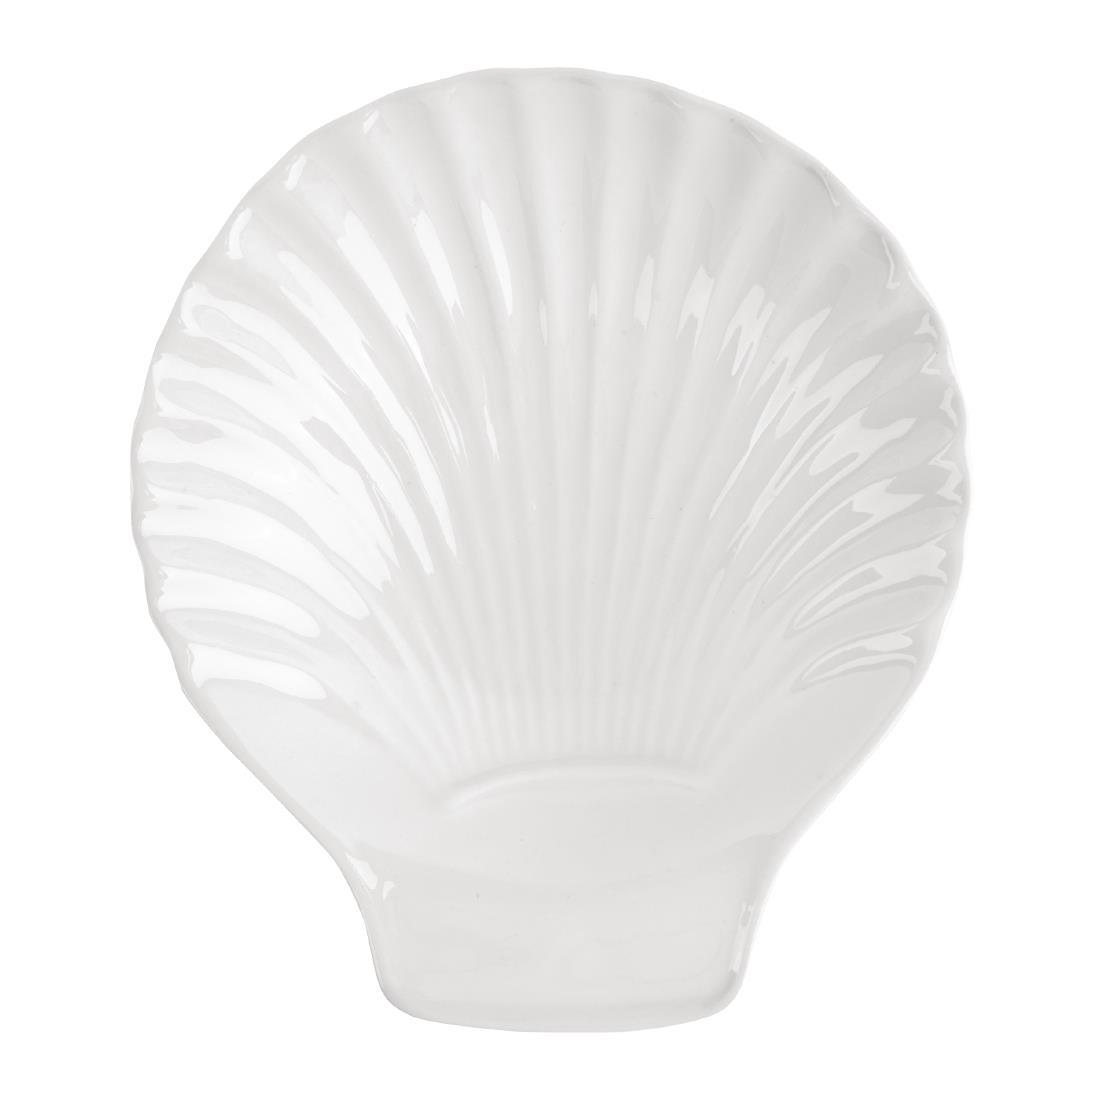 Olympia Scallop Shell Dishes 130mm (Pack of 6) - W420  - 4